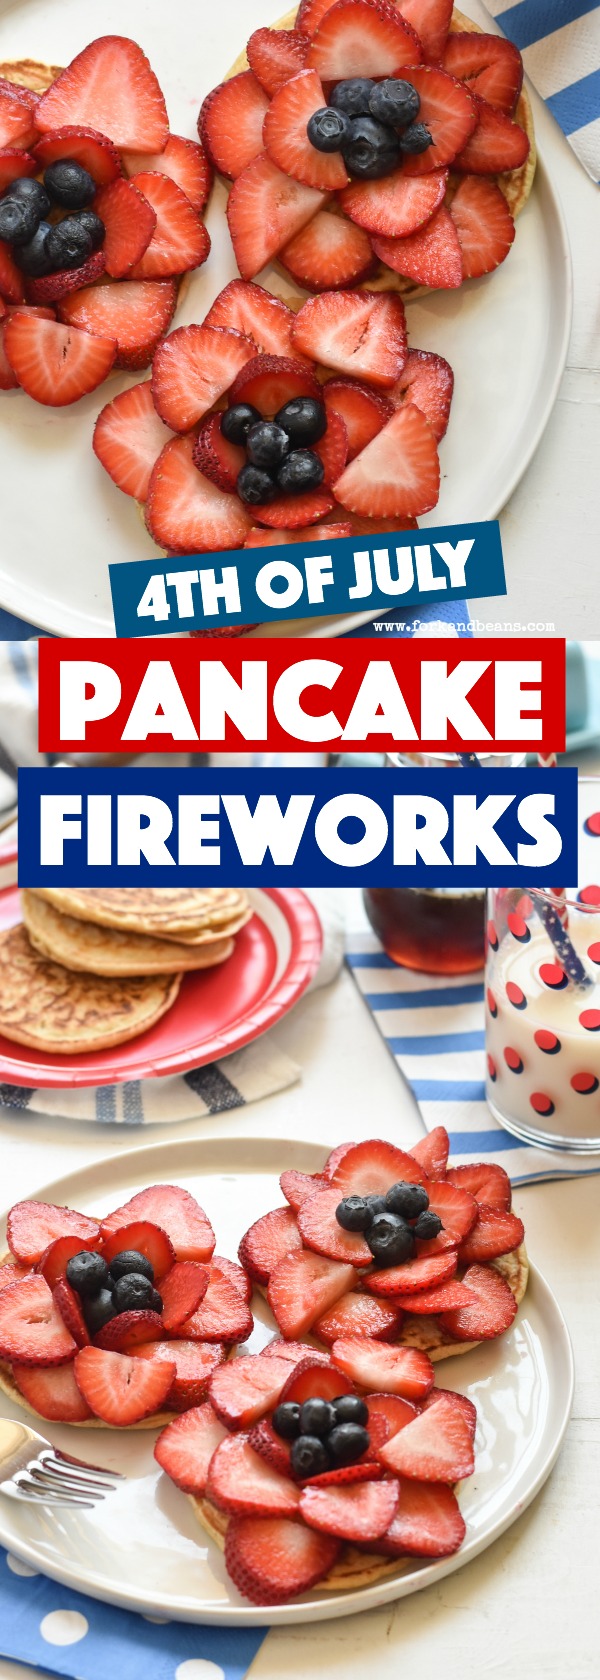 Add sliced strawberries to your favorite breakfast meal to create these patriotic Pancake Fireworks!